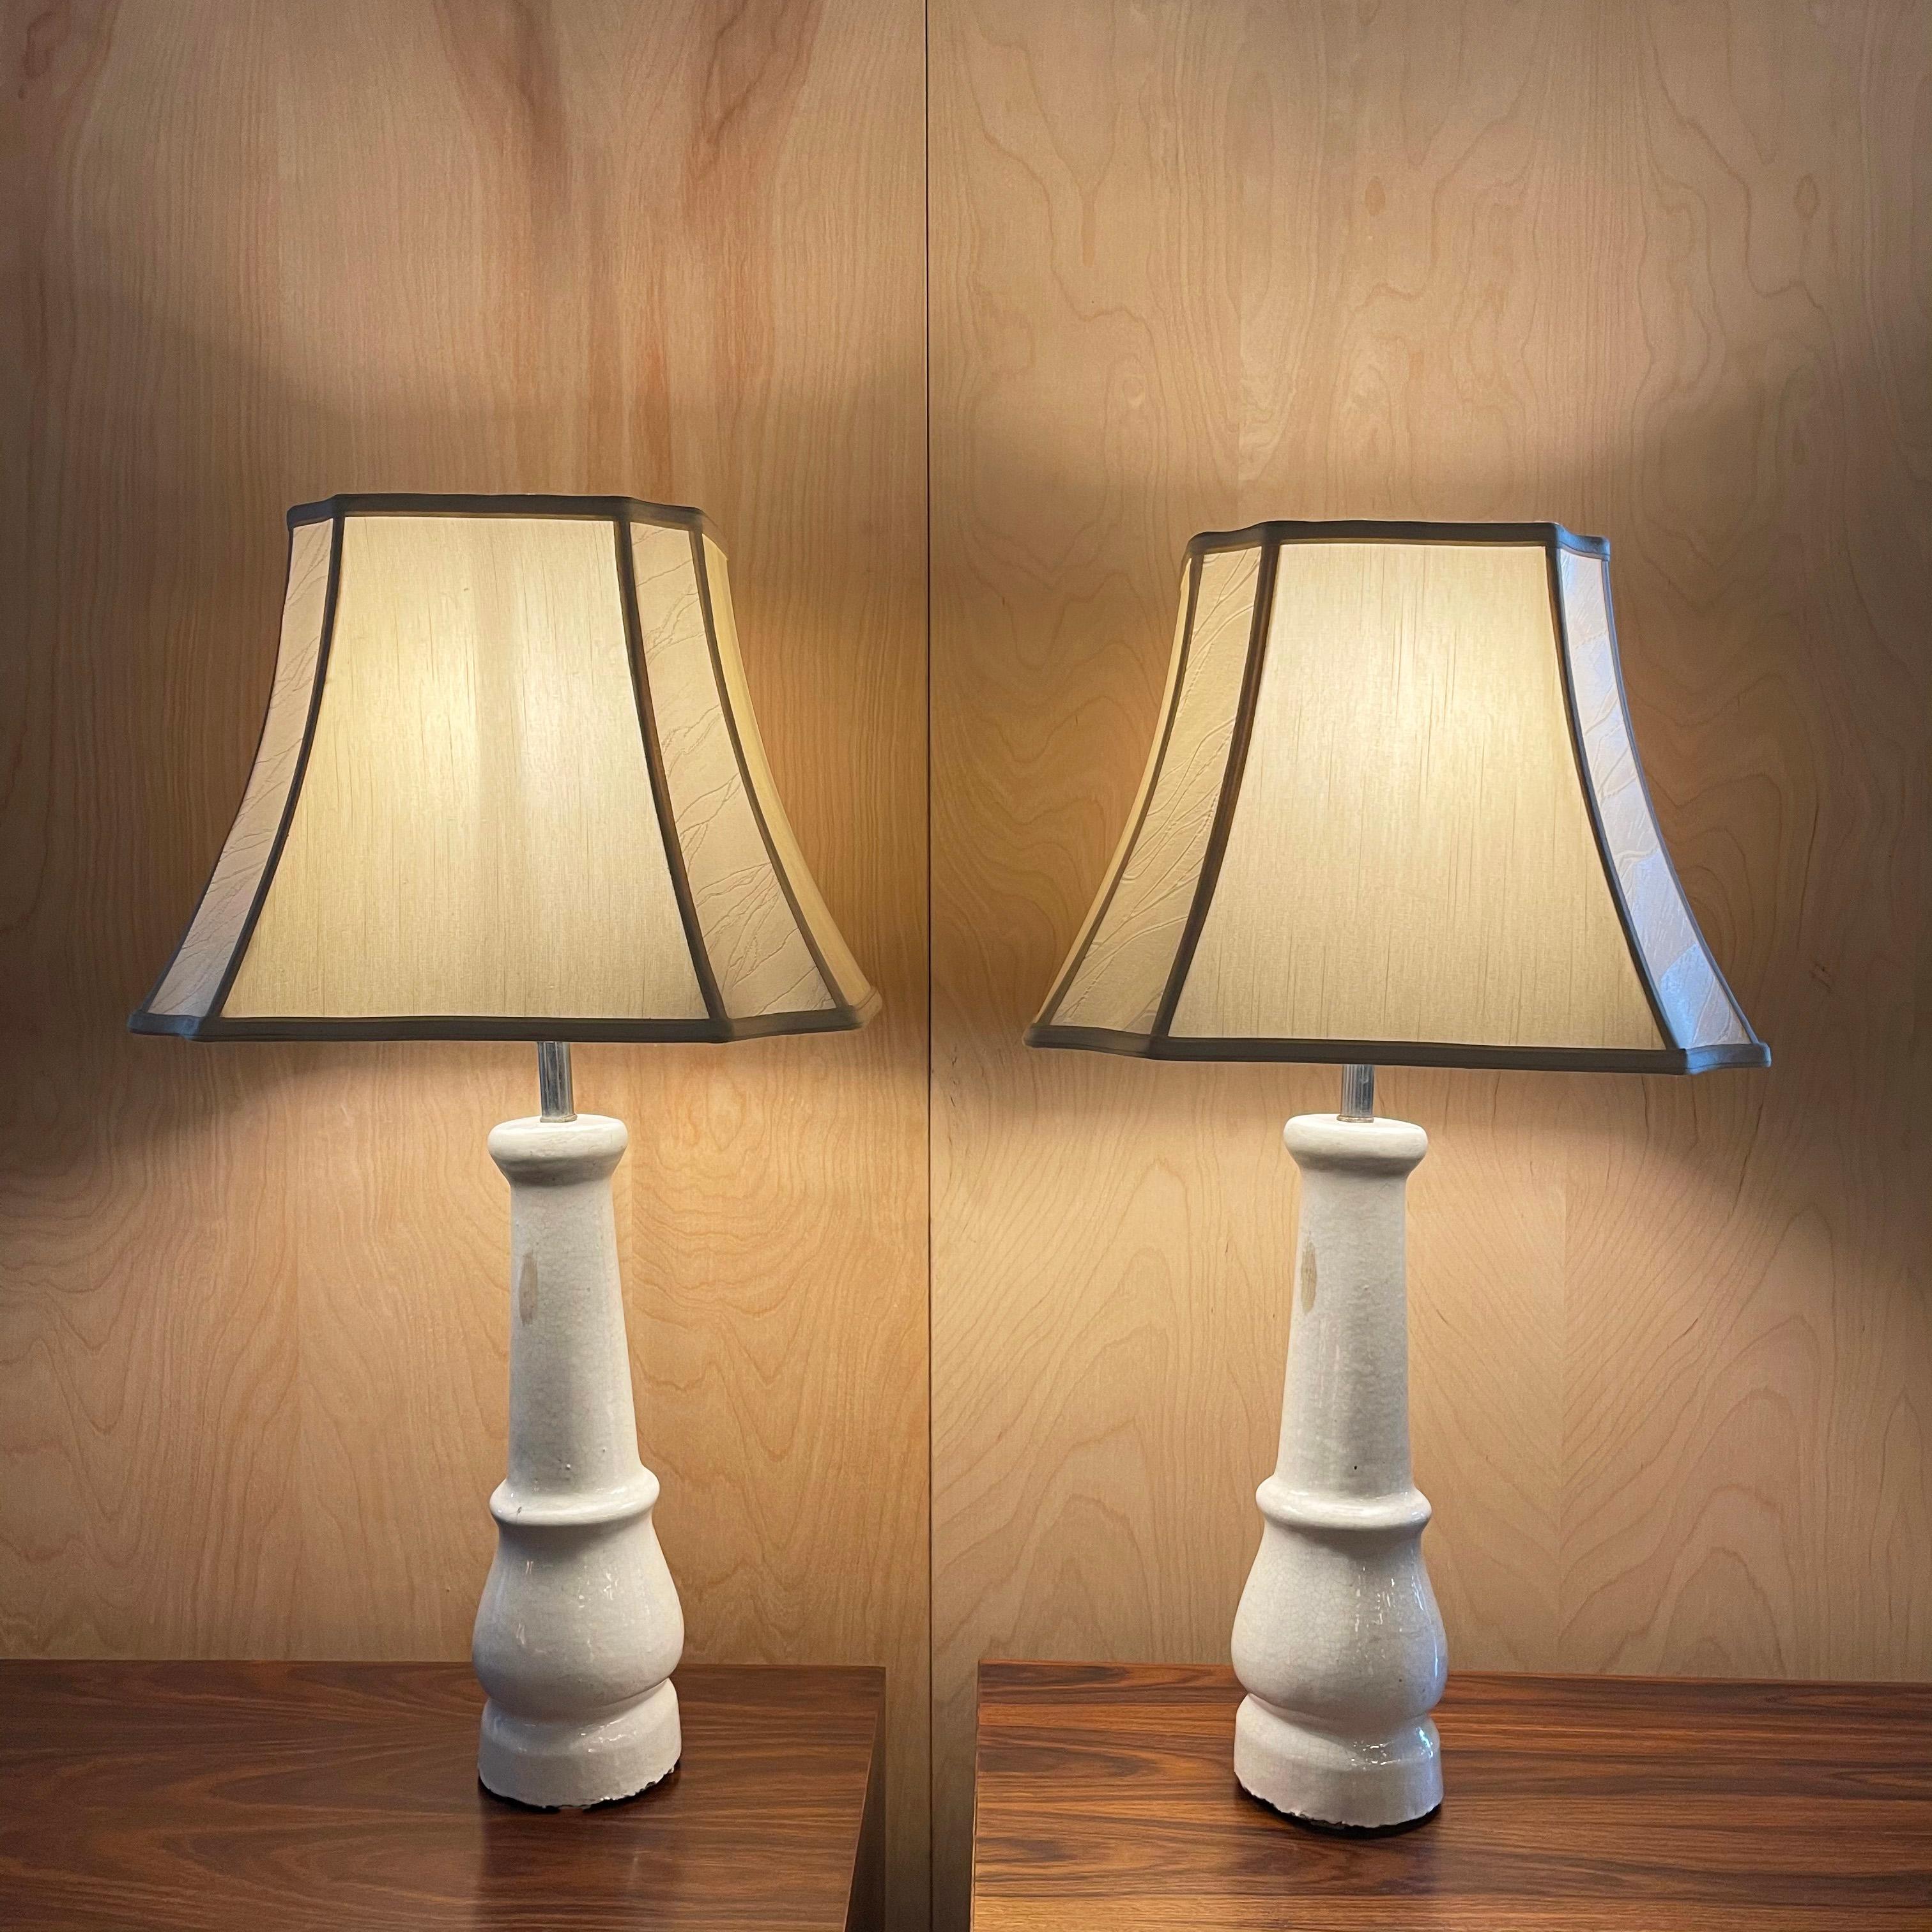 White Porcelain Leg Table Lamps with Shades In Good Condition For Sale In Brooklyn, NY